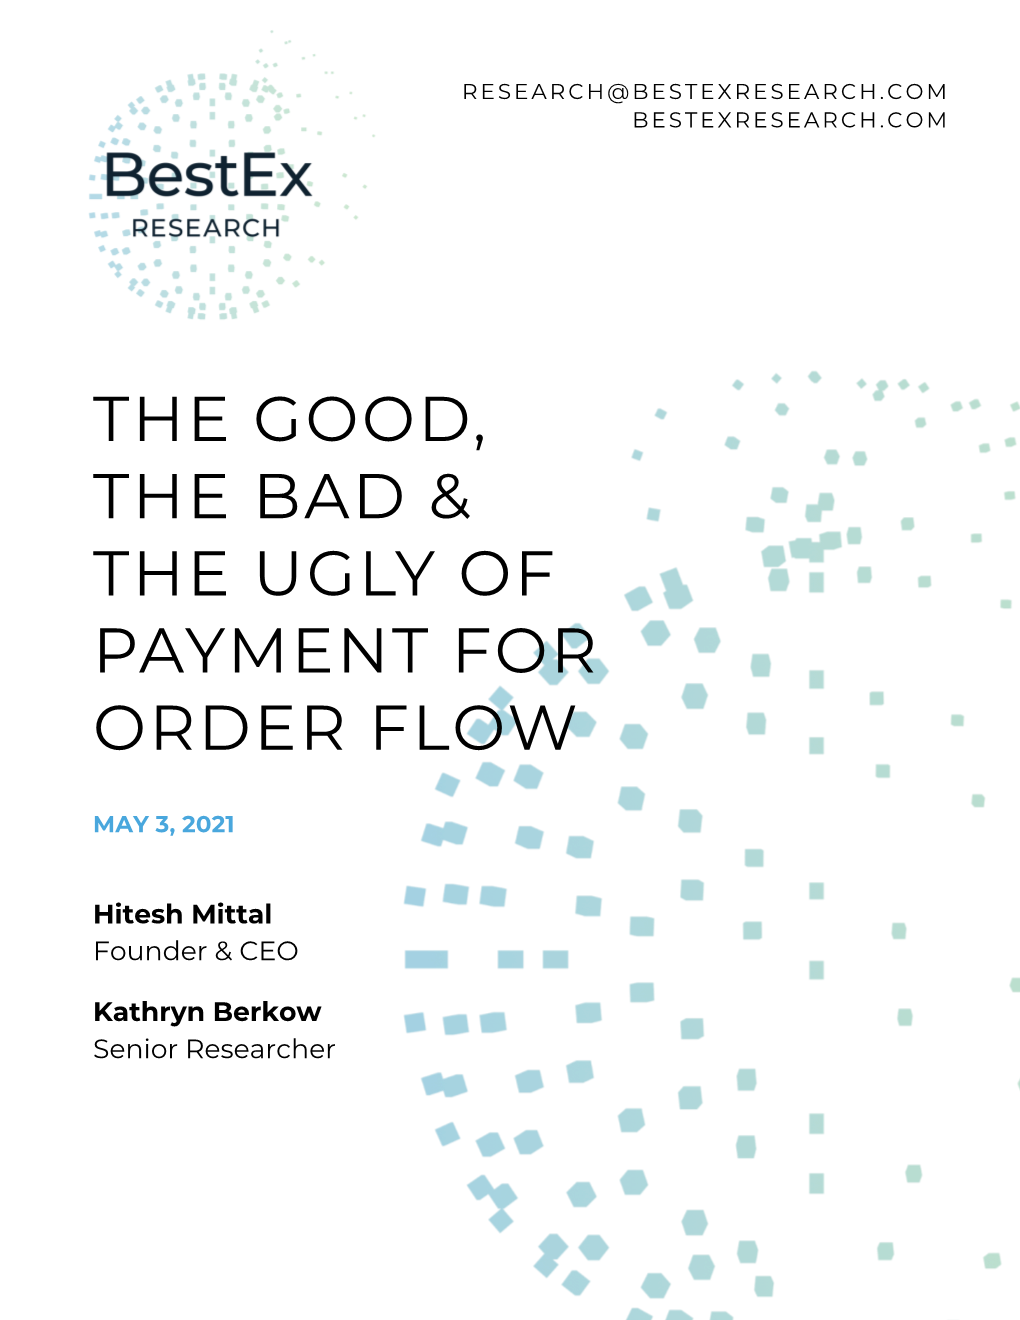 The Good, the Bad & the Ugly of Payment for Order Flow